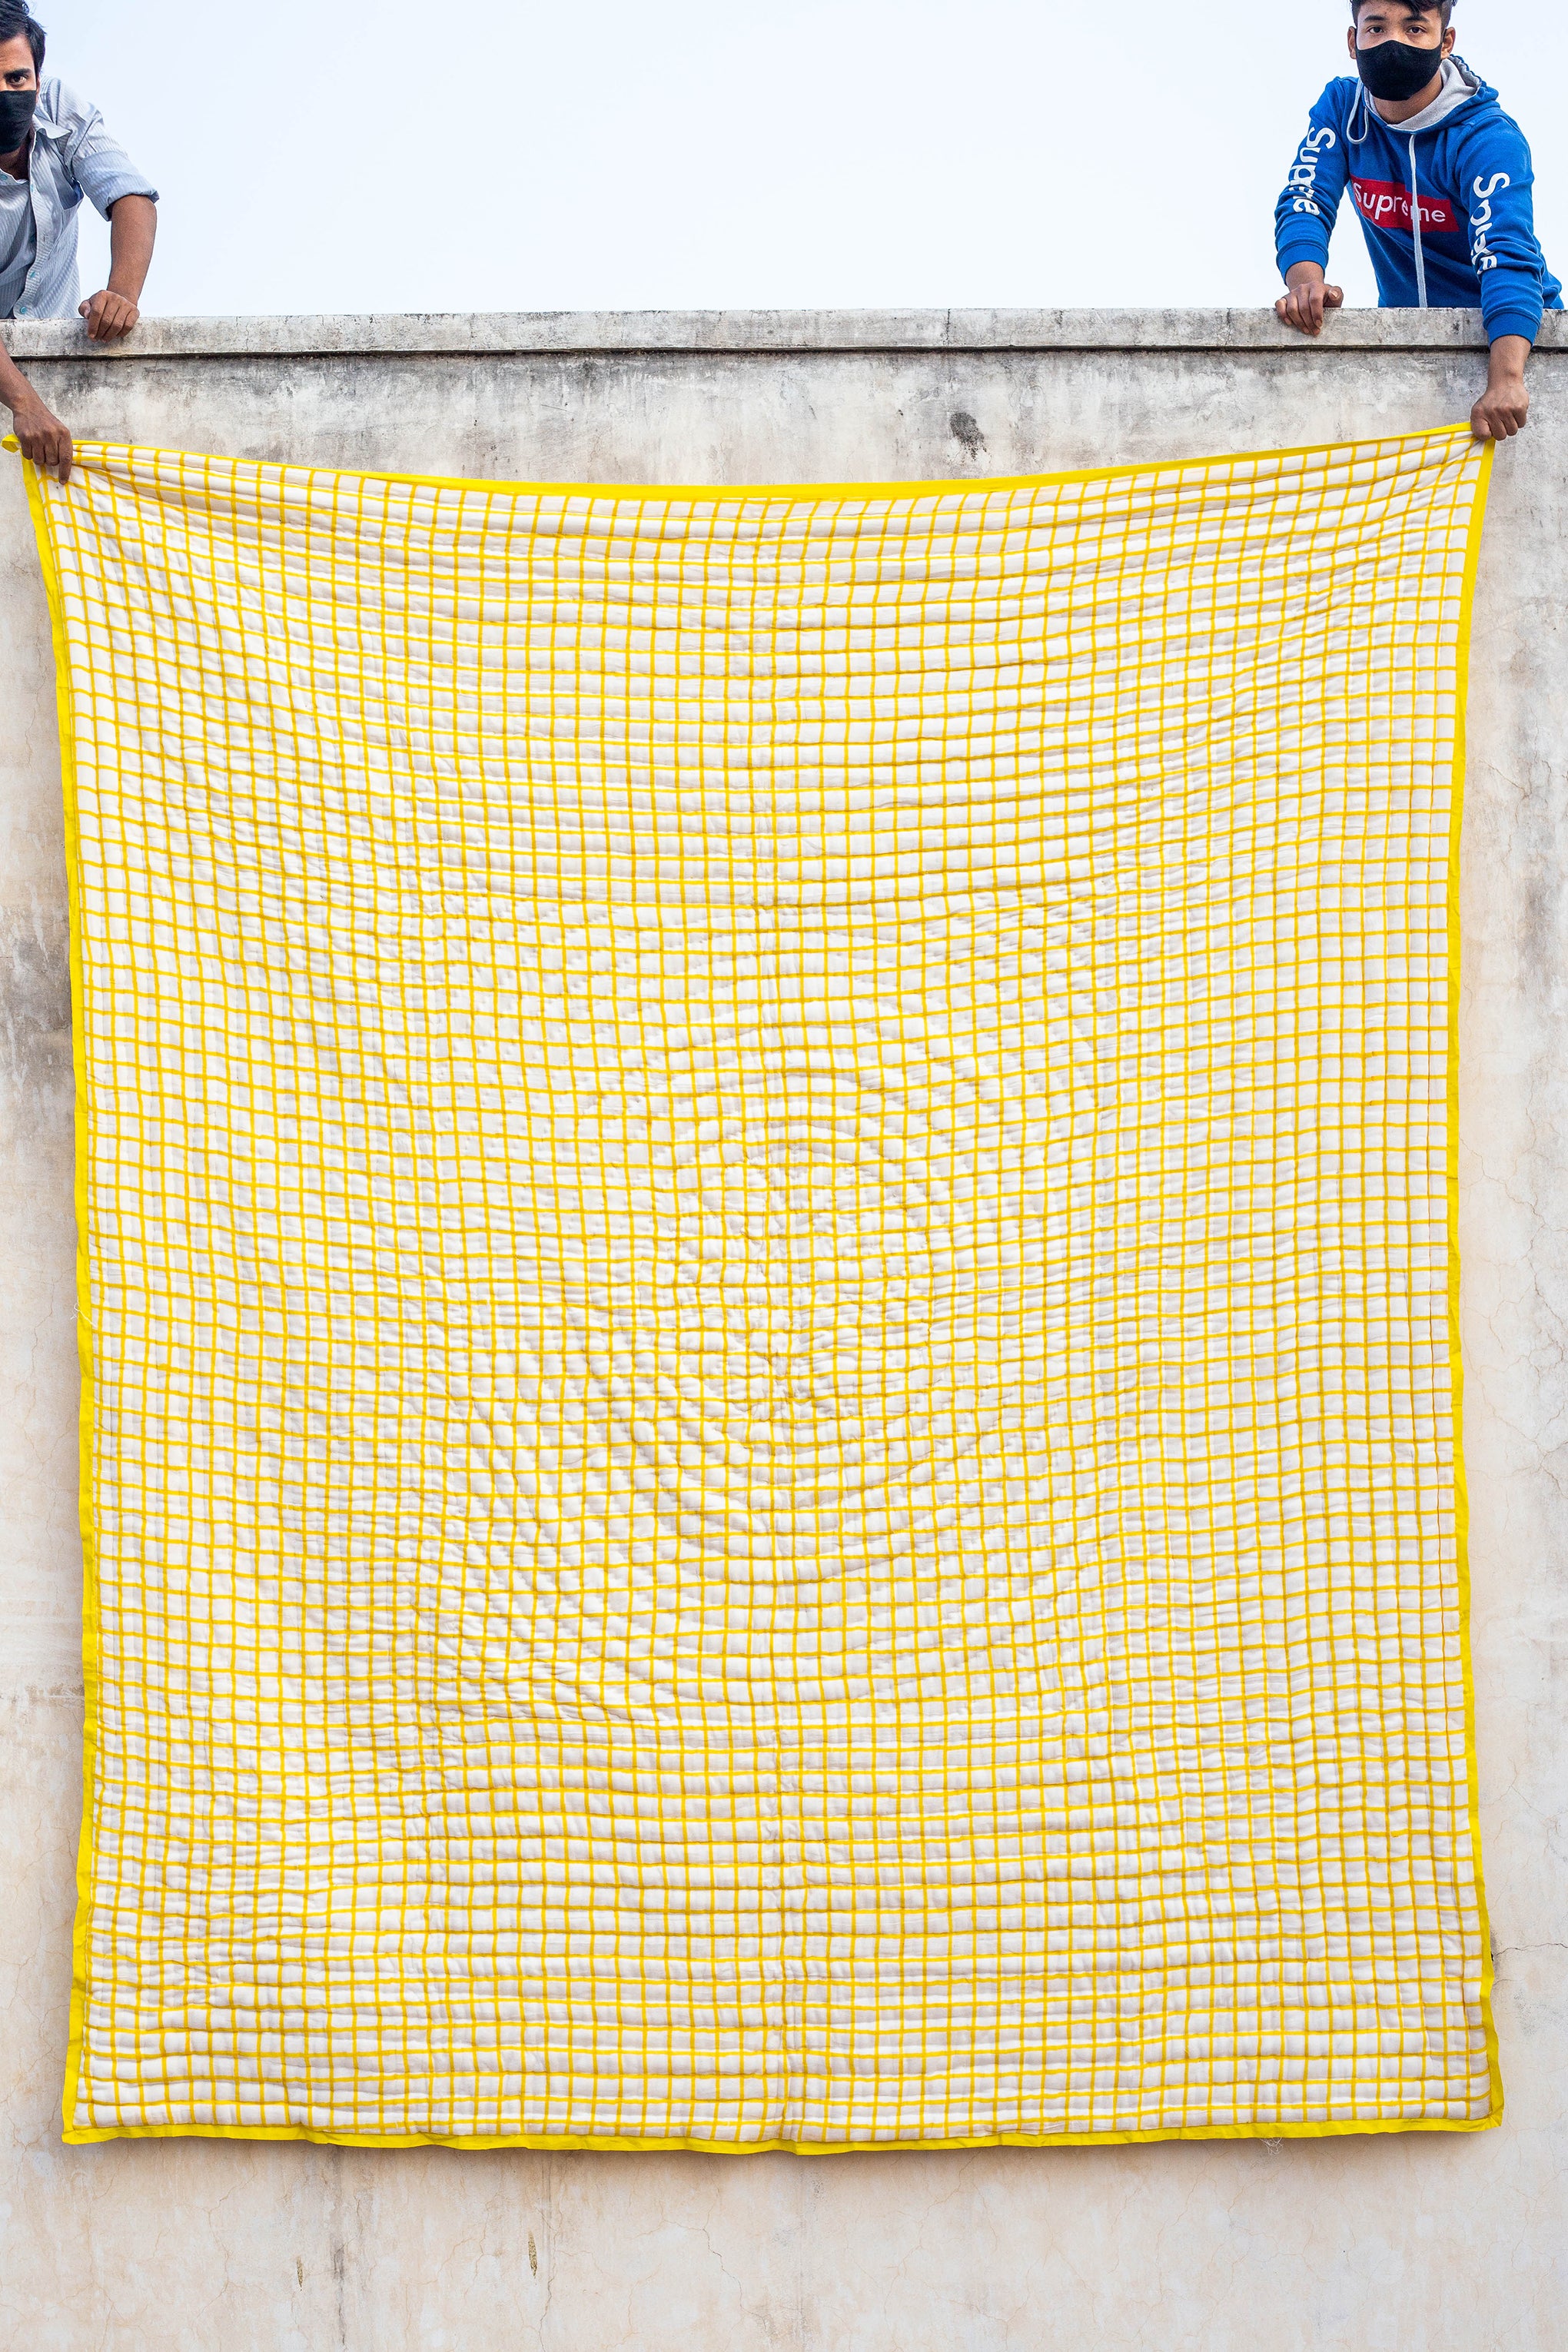 All New Roysha 2021 Queen Quilt Collection,100 Percent Handmade, Hand Block printed Quilt, Jaipuri Quilt, Hand Quilted, Yellow Checks